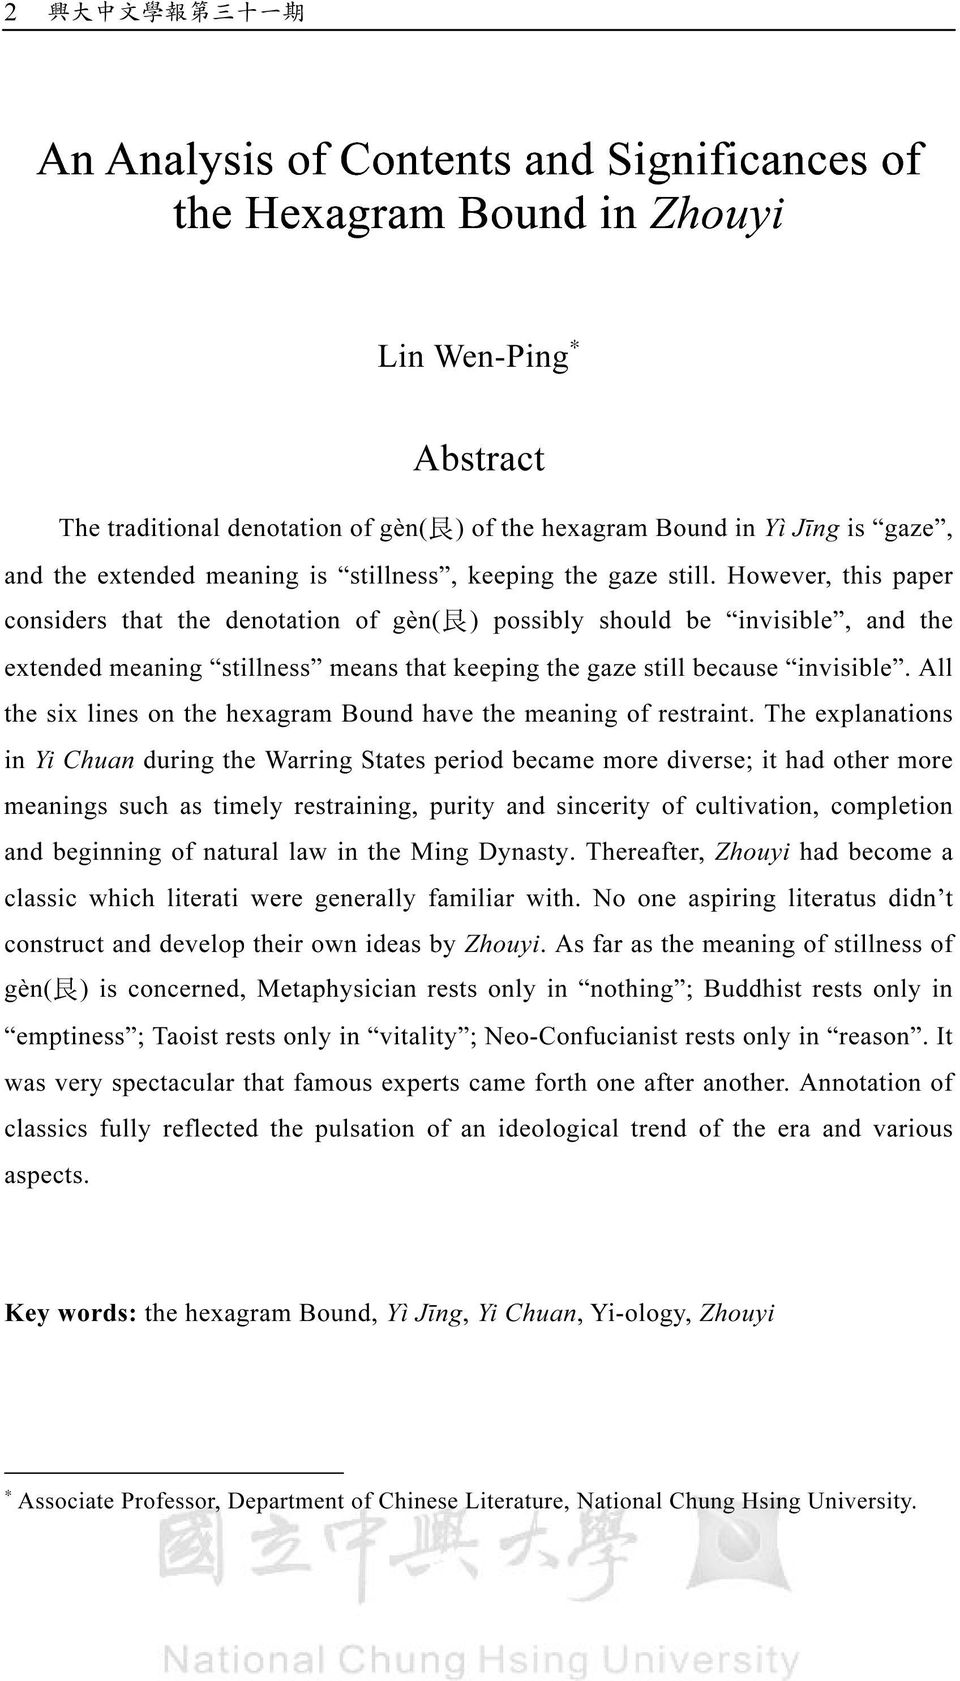 However, this paper considers that the denotation of gèn( 艮 ) possibly should be invisible, and the extended meaning stillness means that keeping the gaze still because invisible.